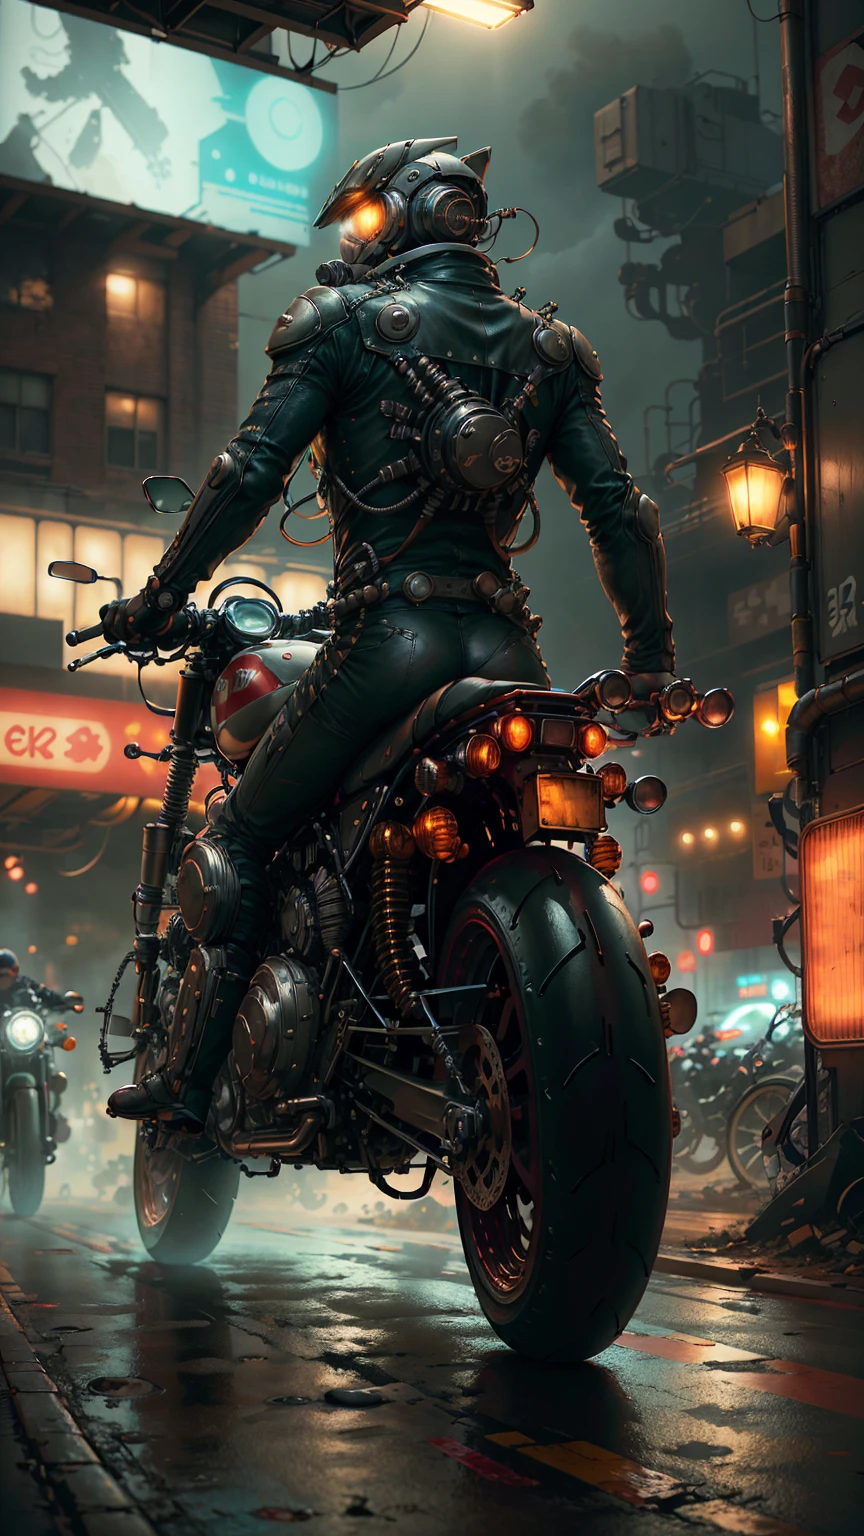 detailed cyberpunk motorcycle, futuristic motorcycle, riding on the road, motorcycle from behind view, 1 person riding motorcycle, intricate details, high resolution, 8k, photorealistic, hyper detailed, cinematic lighting, dynamic motion blur, gritty urban environment, neon lights, glowing cybernetic elements, chrome accents, weathered texture, mecha-inspired design, complex machinery, industrial cityscape, moody color palette